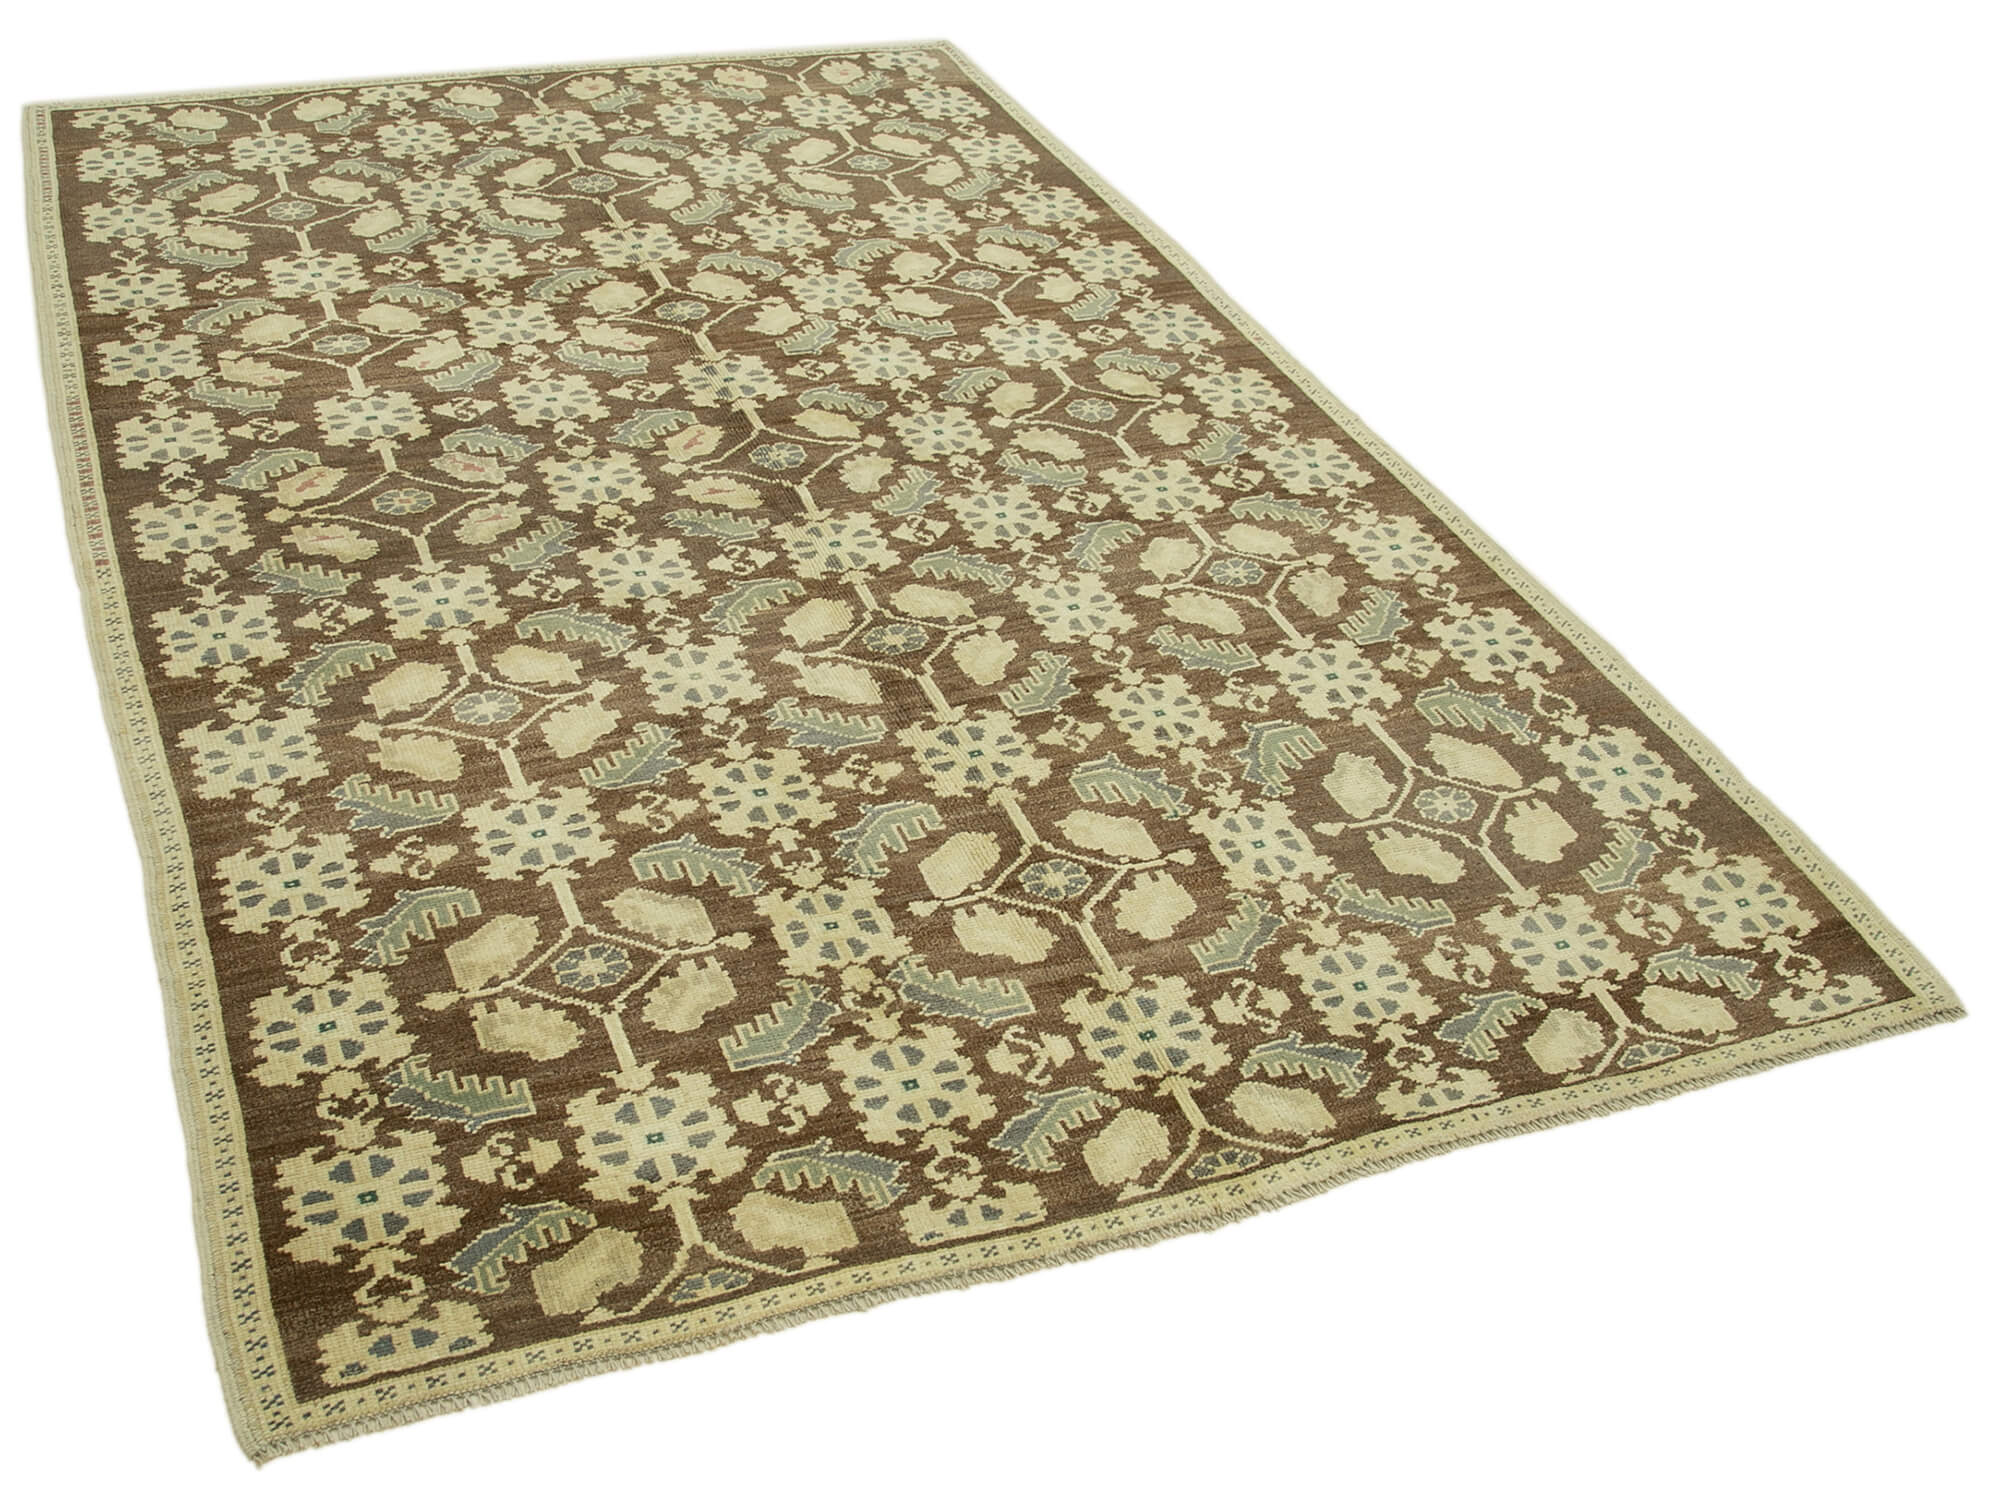 5x8 kitchen table rug